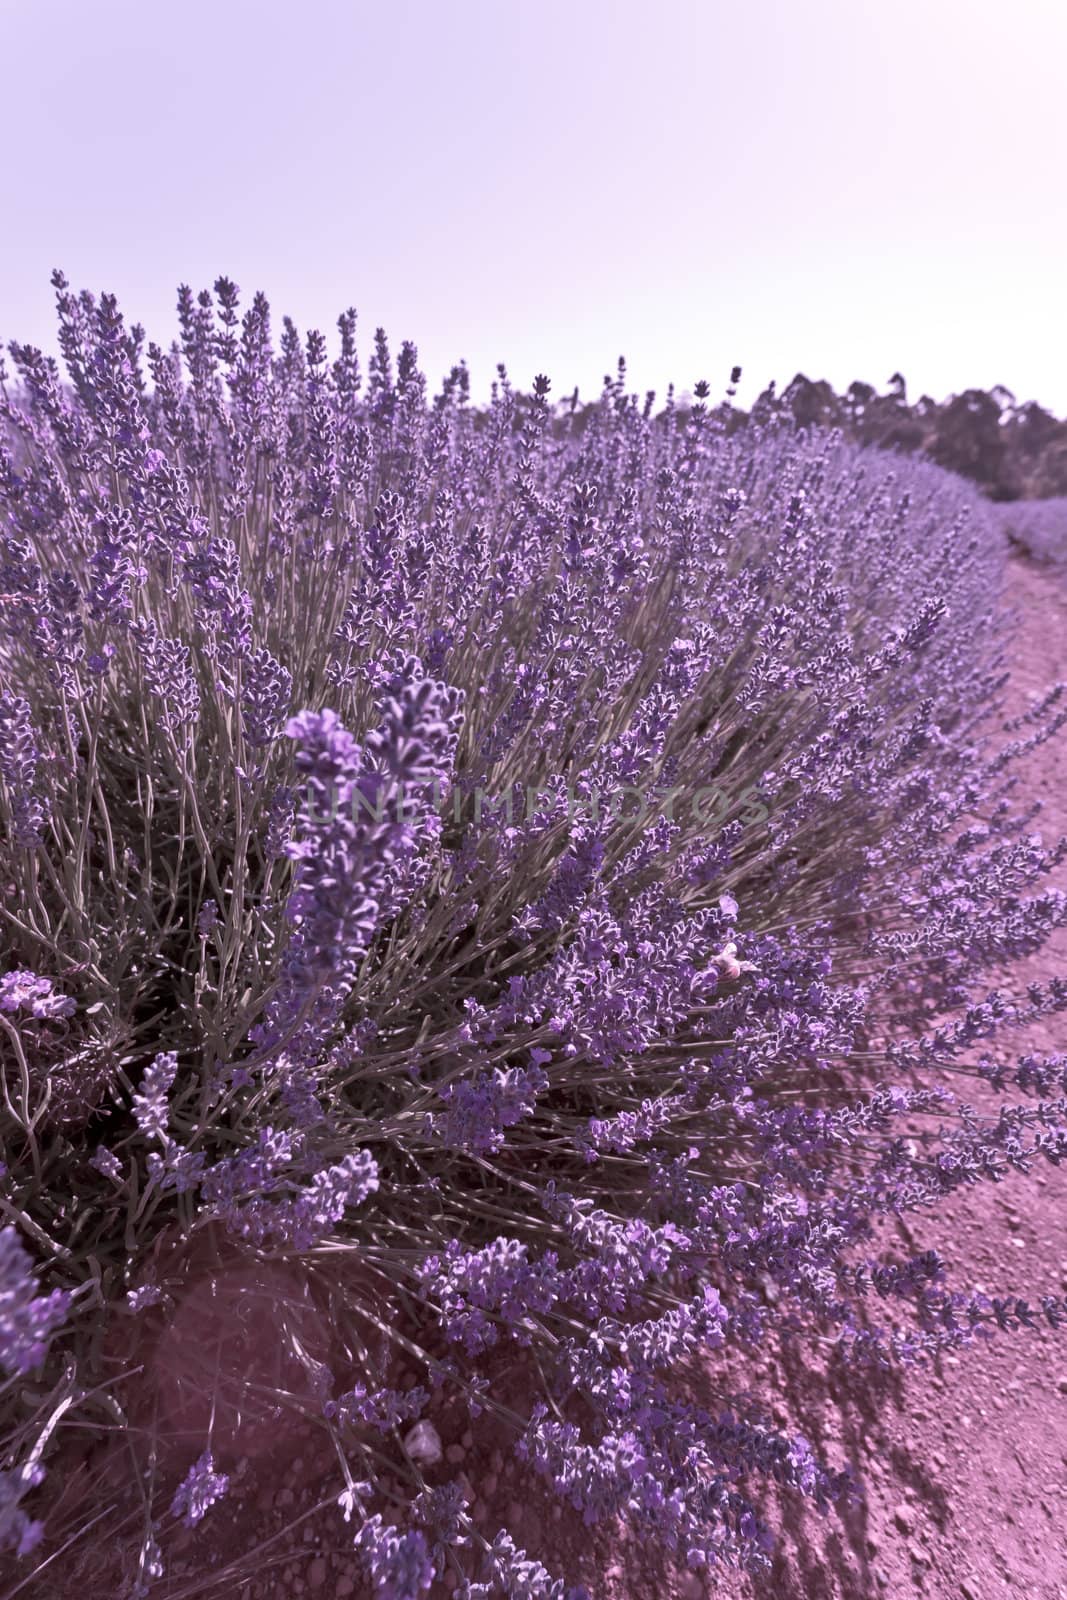 Beautiful purple lavender bush covered in dense colourful flowers in an agricultural lavender field to be harvested for use in the perfumery industry